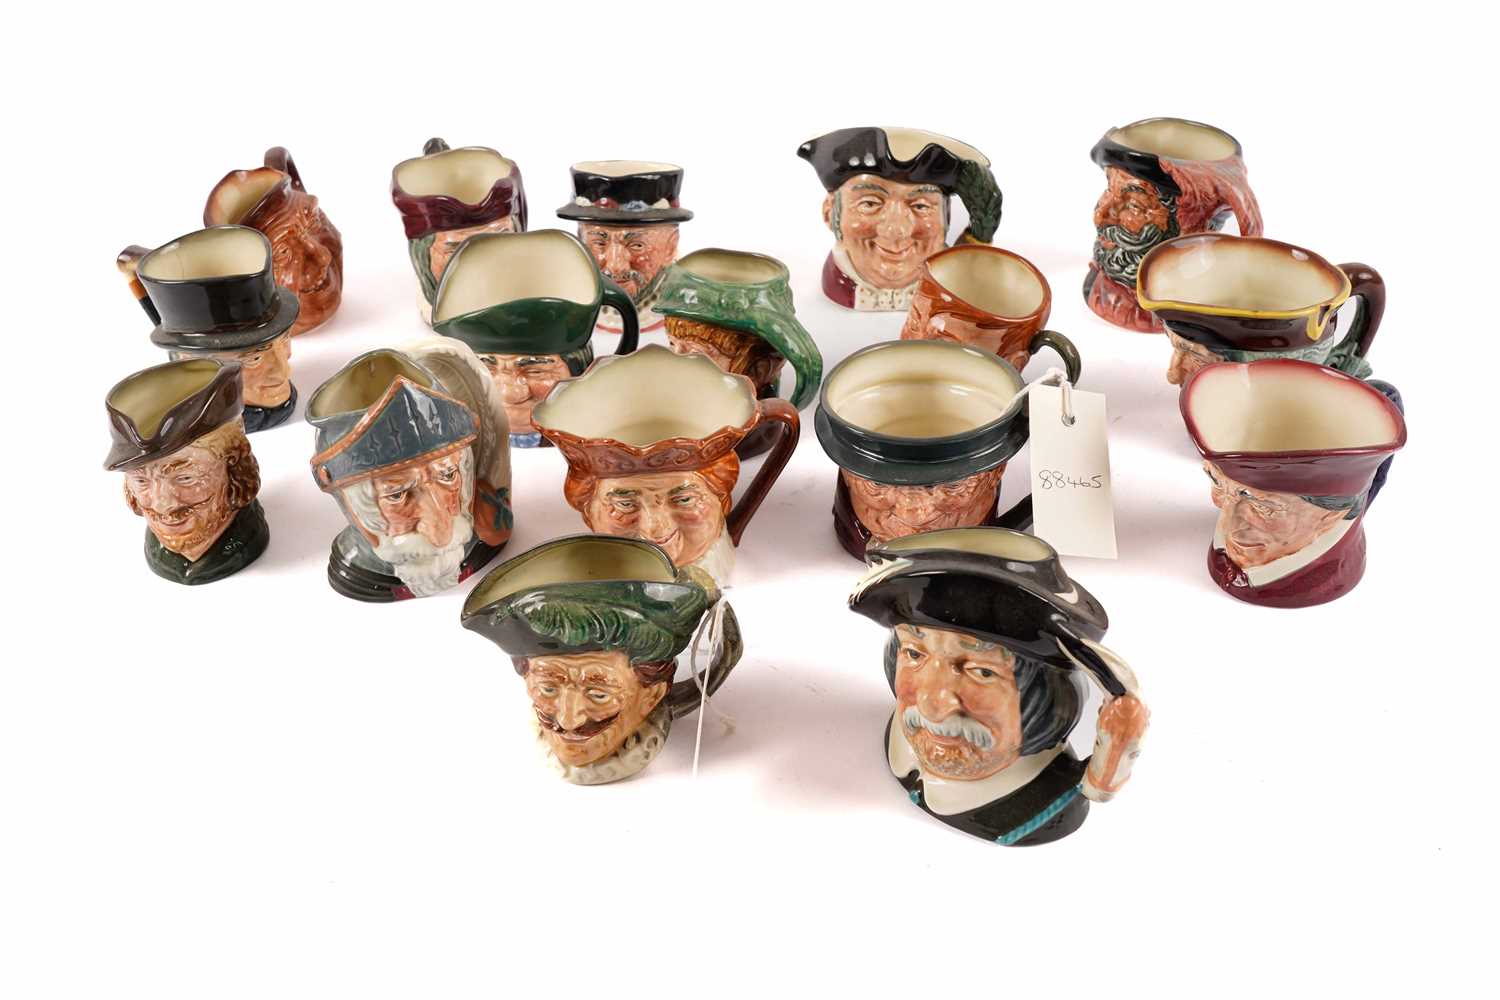 A collection of Royal Doulton Toby jugs